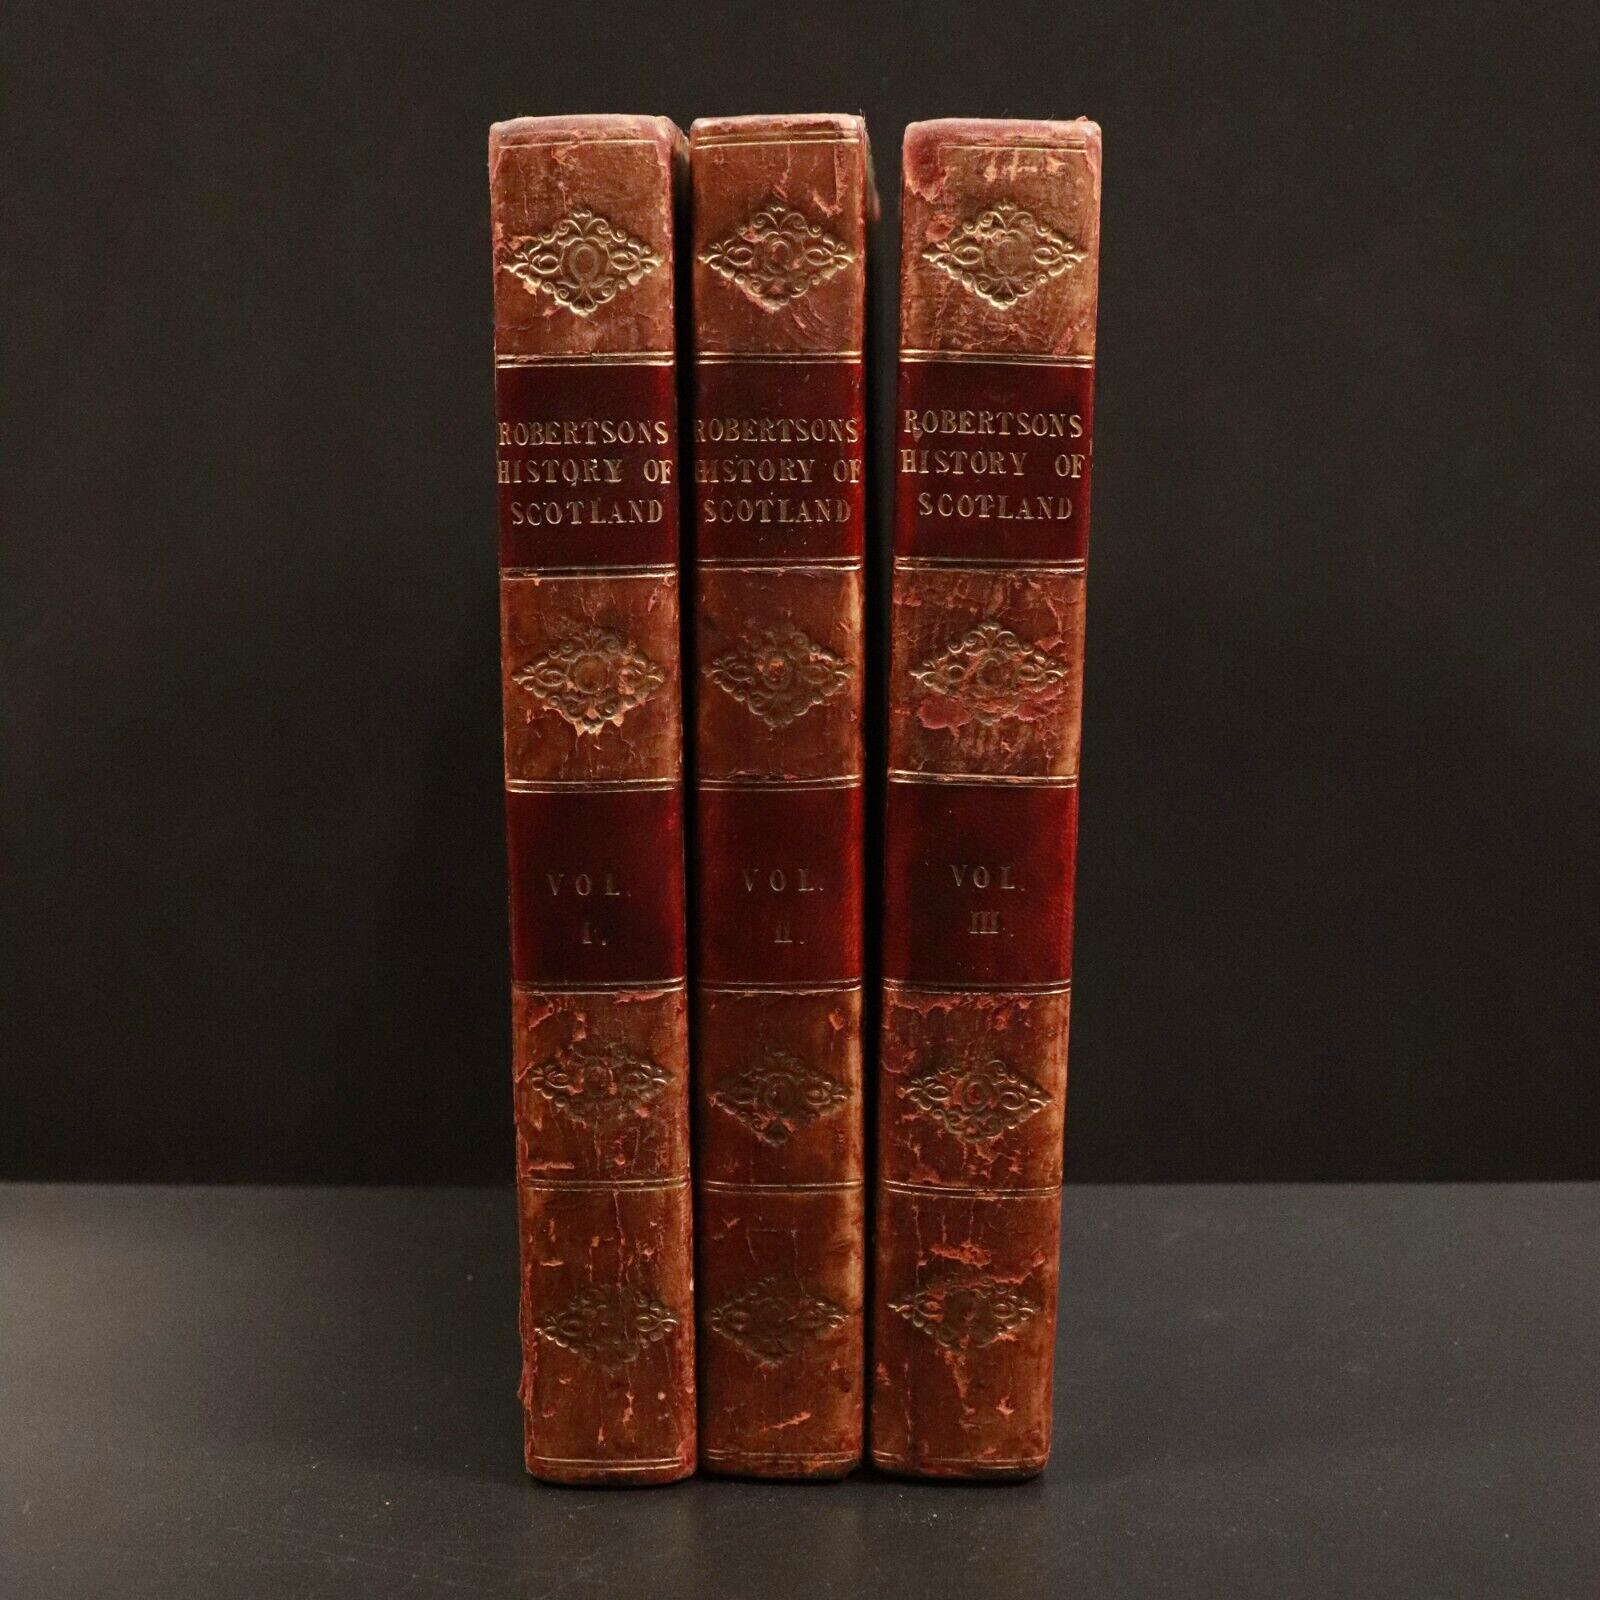 1809 3vol The History Of Scotland by William Robertson - Antiquarian Book Set